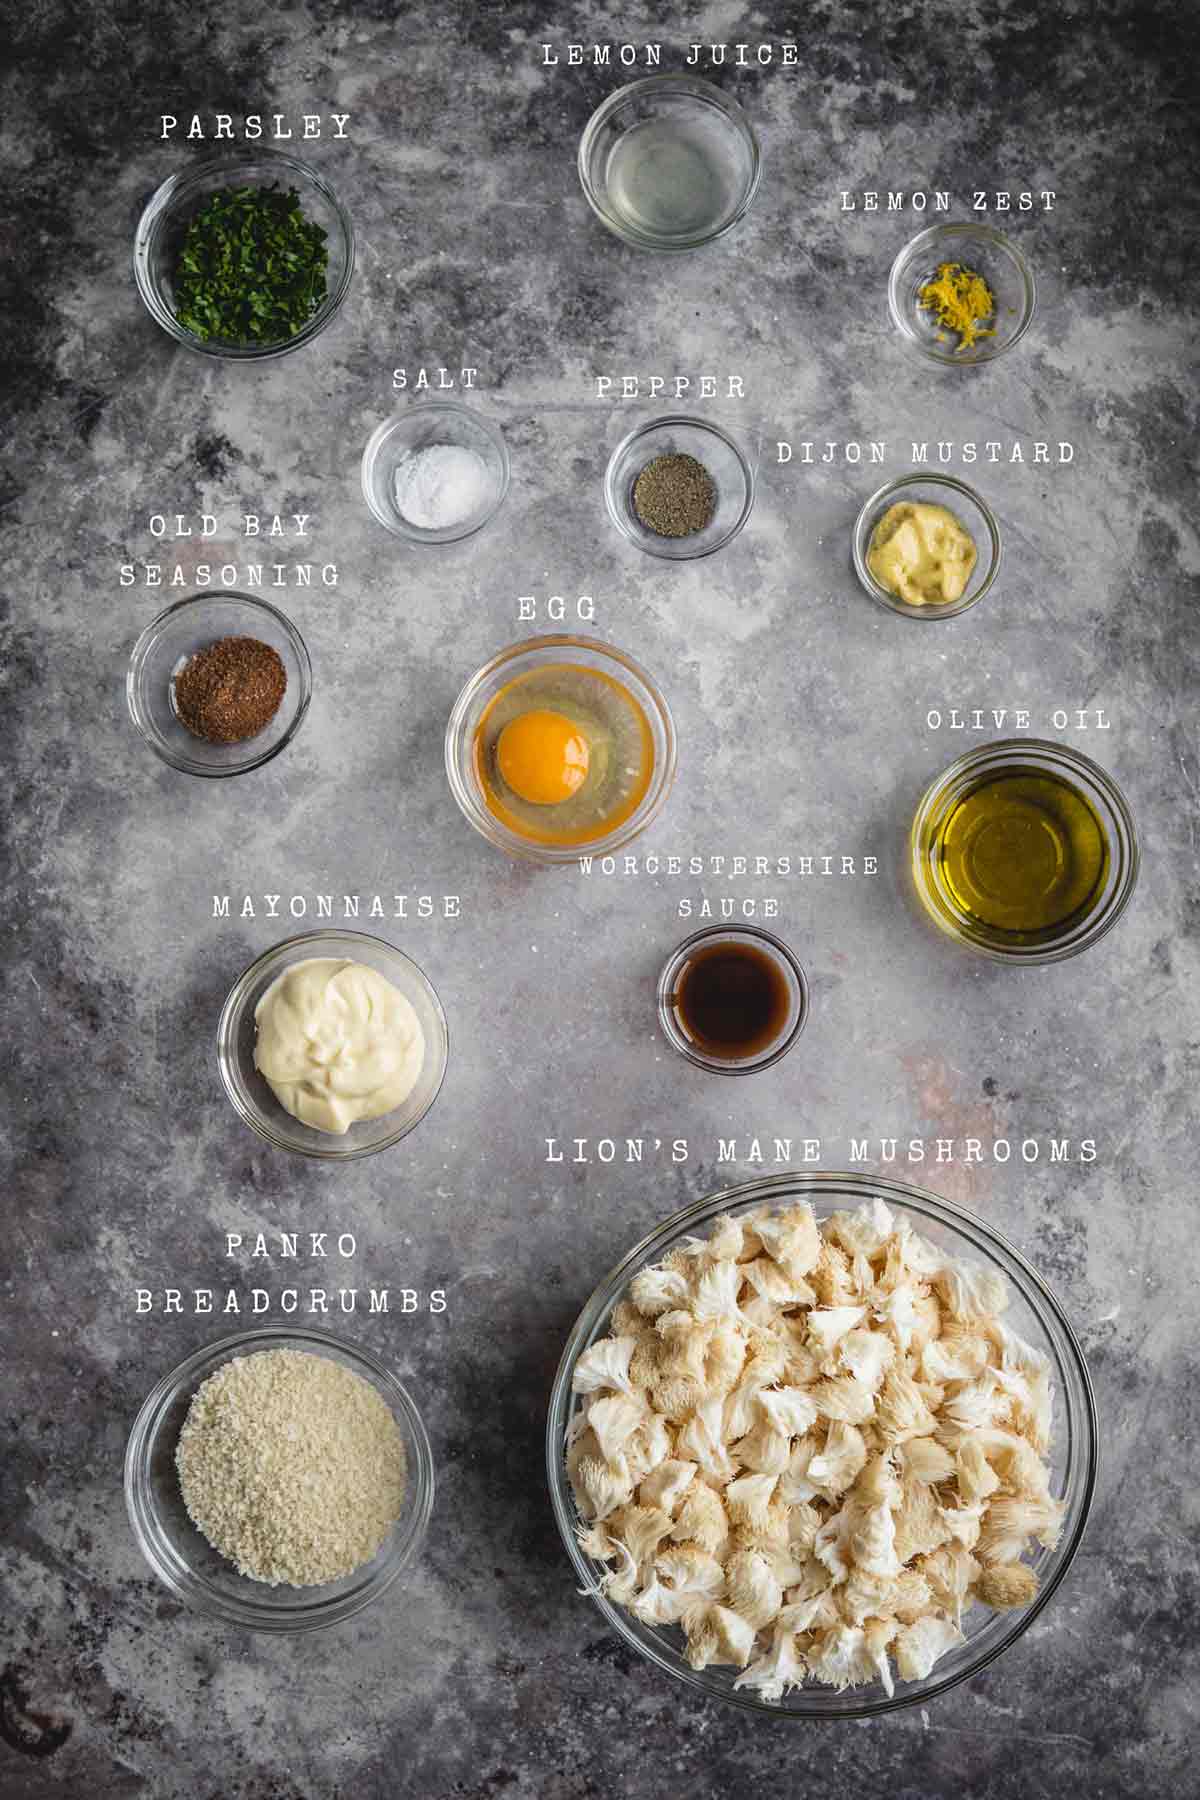 Ingredients of the Lion's mane crab-cakes